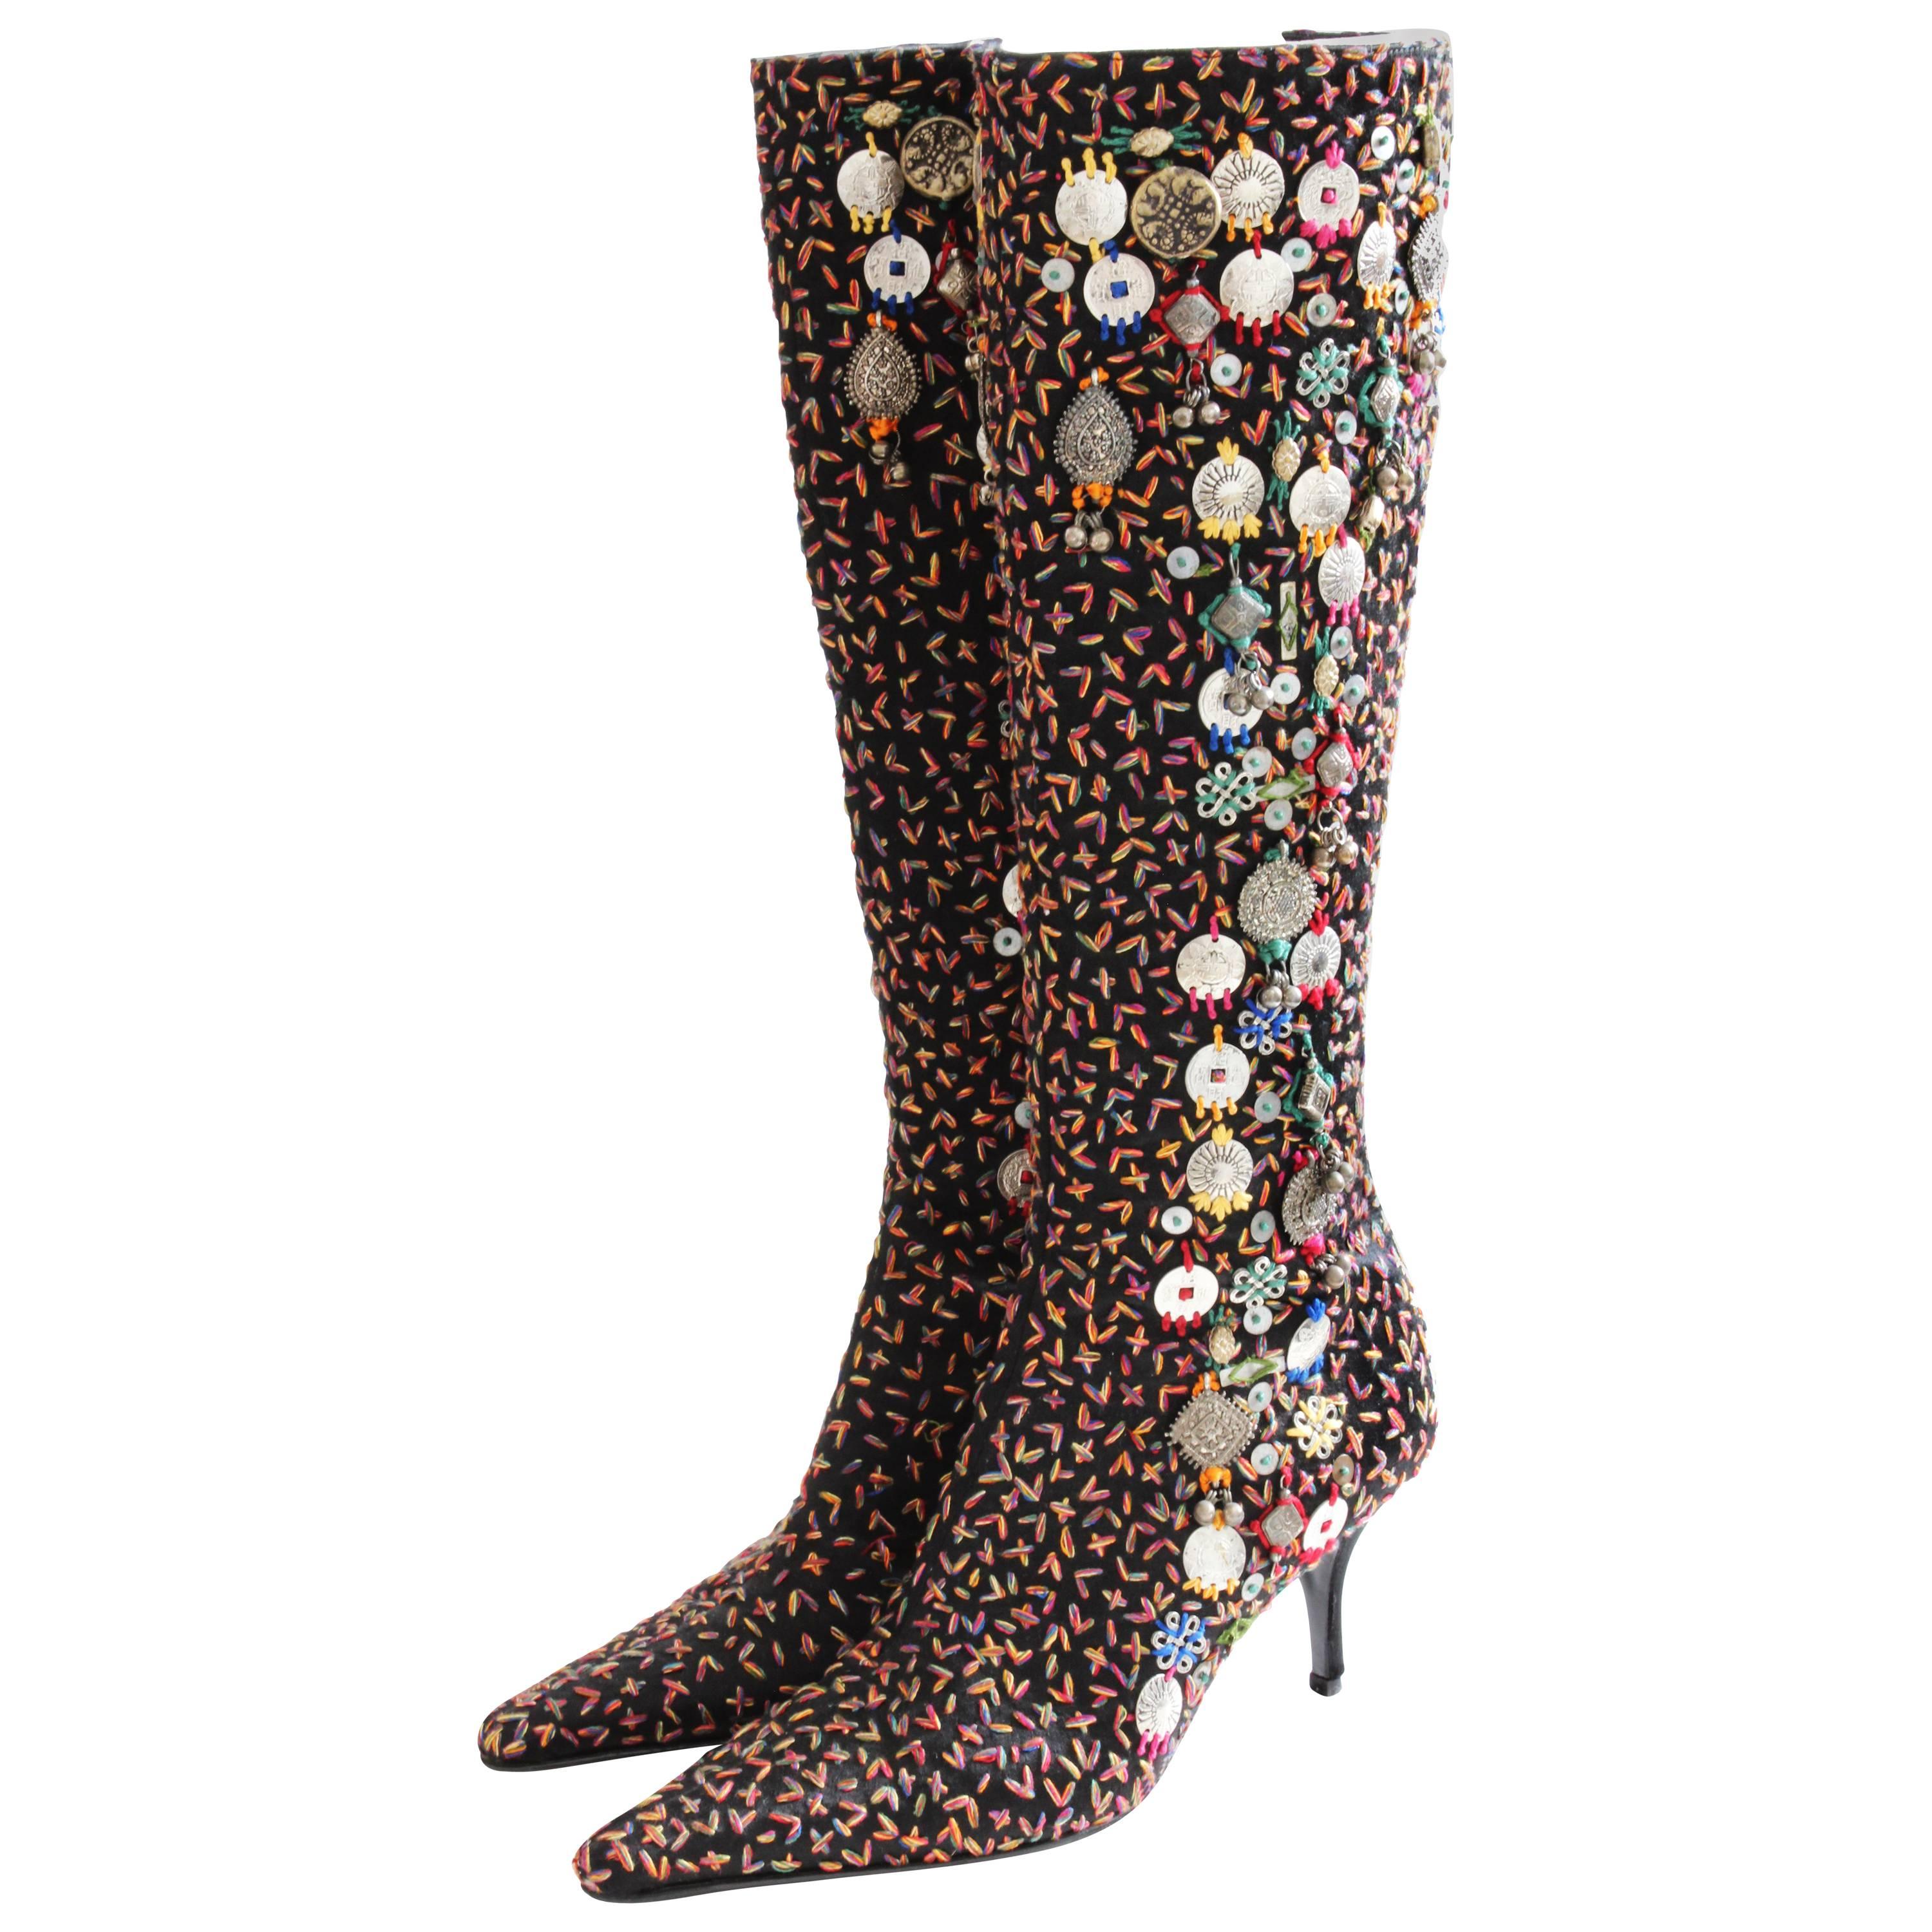 Oscar de la Renta Embellished Knee High Boots Black with Embroidery Italy